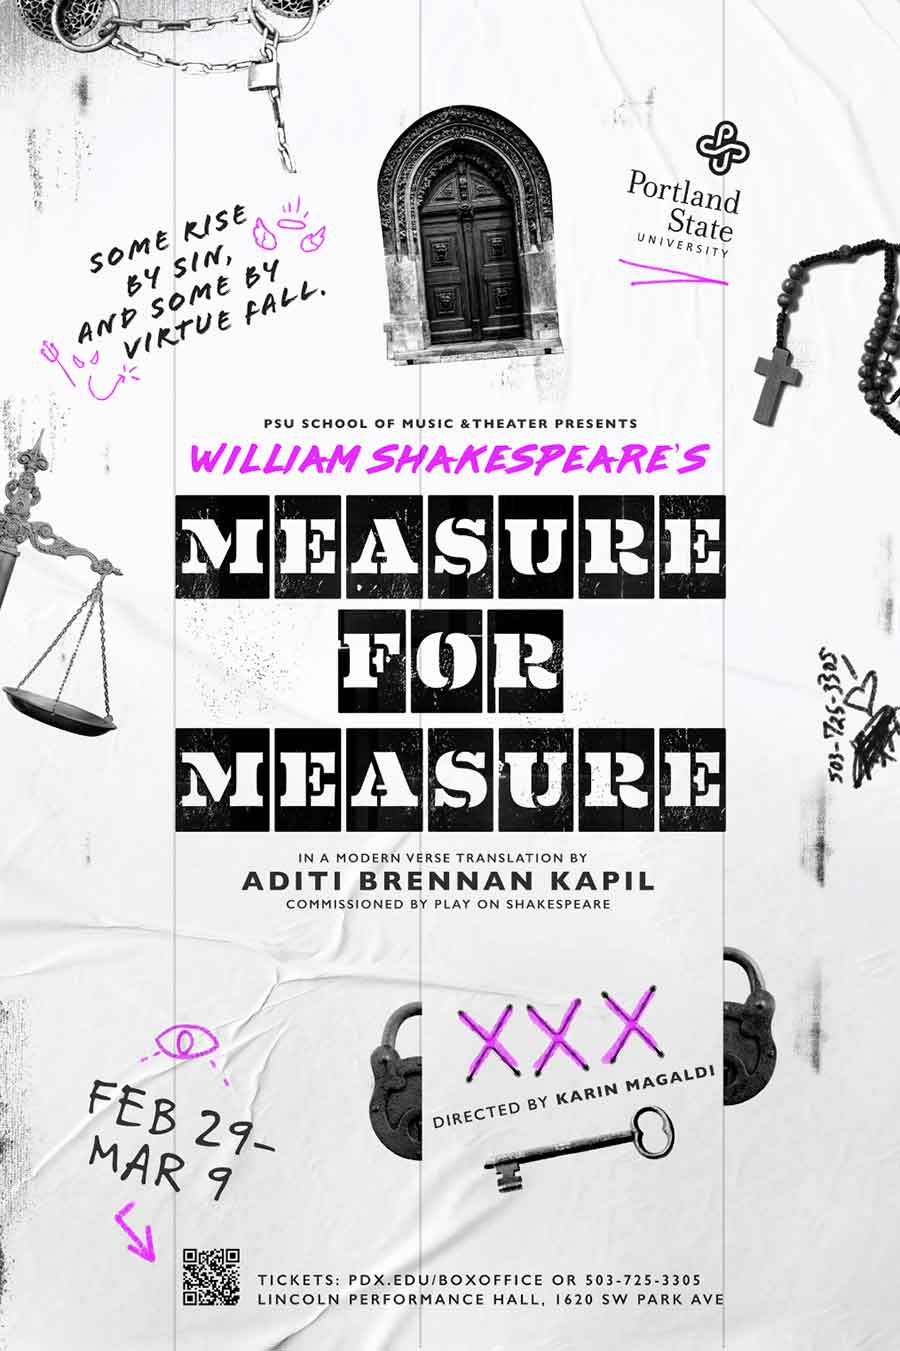 PSU School of Music & Theater presents: William Shakespeare's Measure for Measure in a modern verse translation by Aditi Brennan Kapil, commissioned by Play On Shakespeare. Directed by Karin Magaldi. Feb 29 - March 9. 